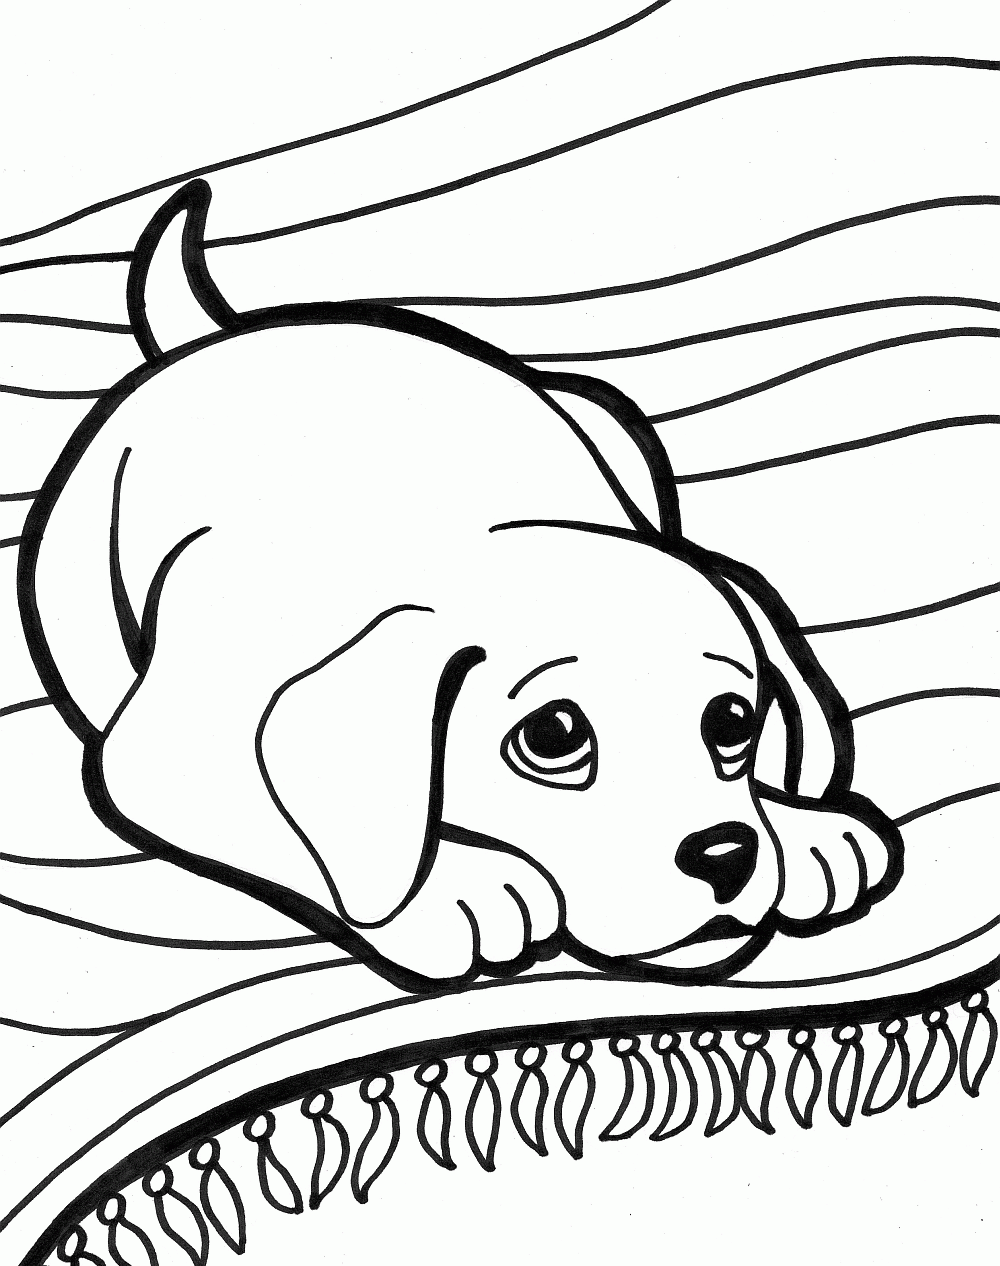 Download Free Cute Dog Coloring Pages to print | kentscraft